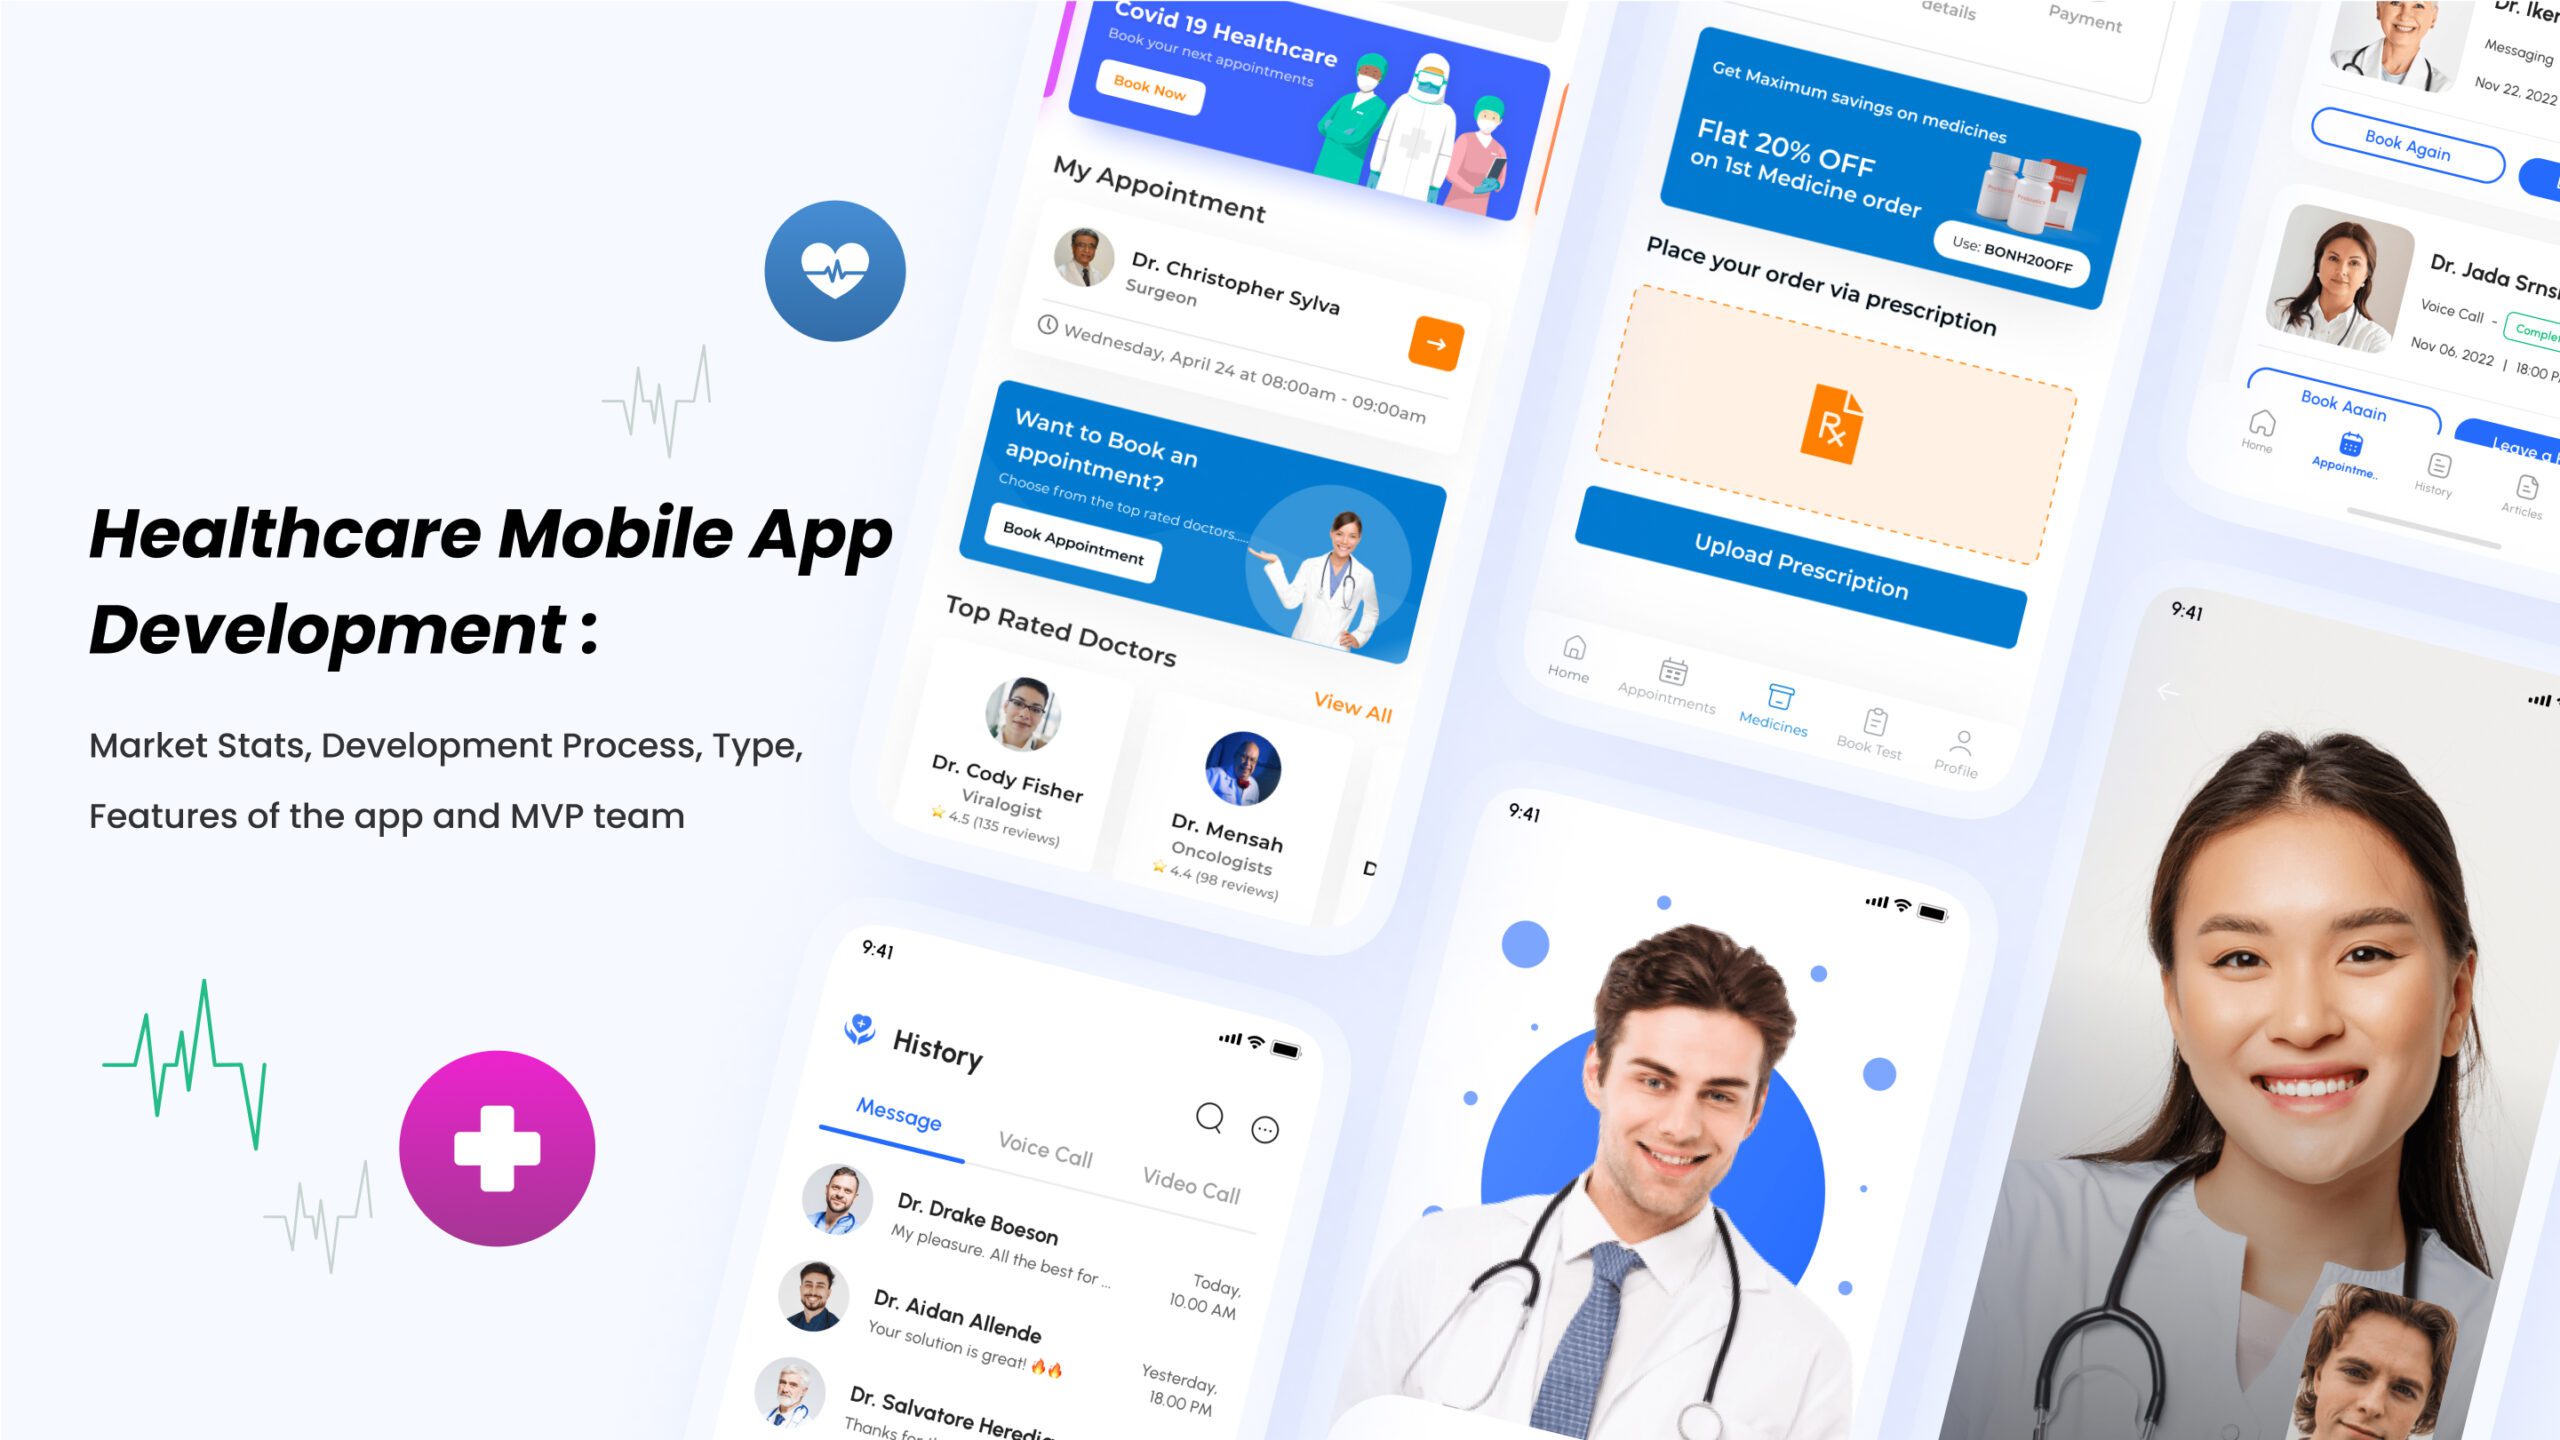 Healthcare Apps Development: Market Stats, Development Process, Type, Features of the app and MVP team